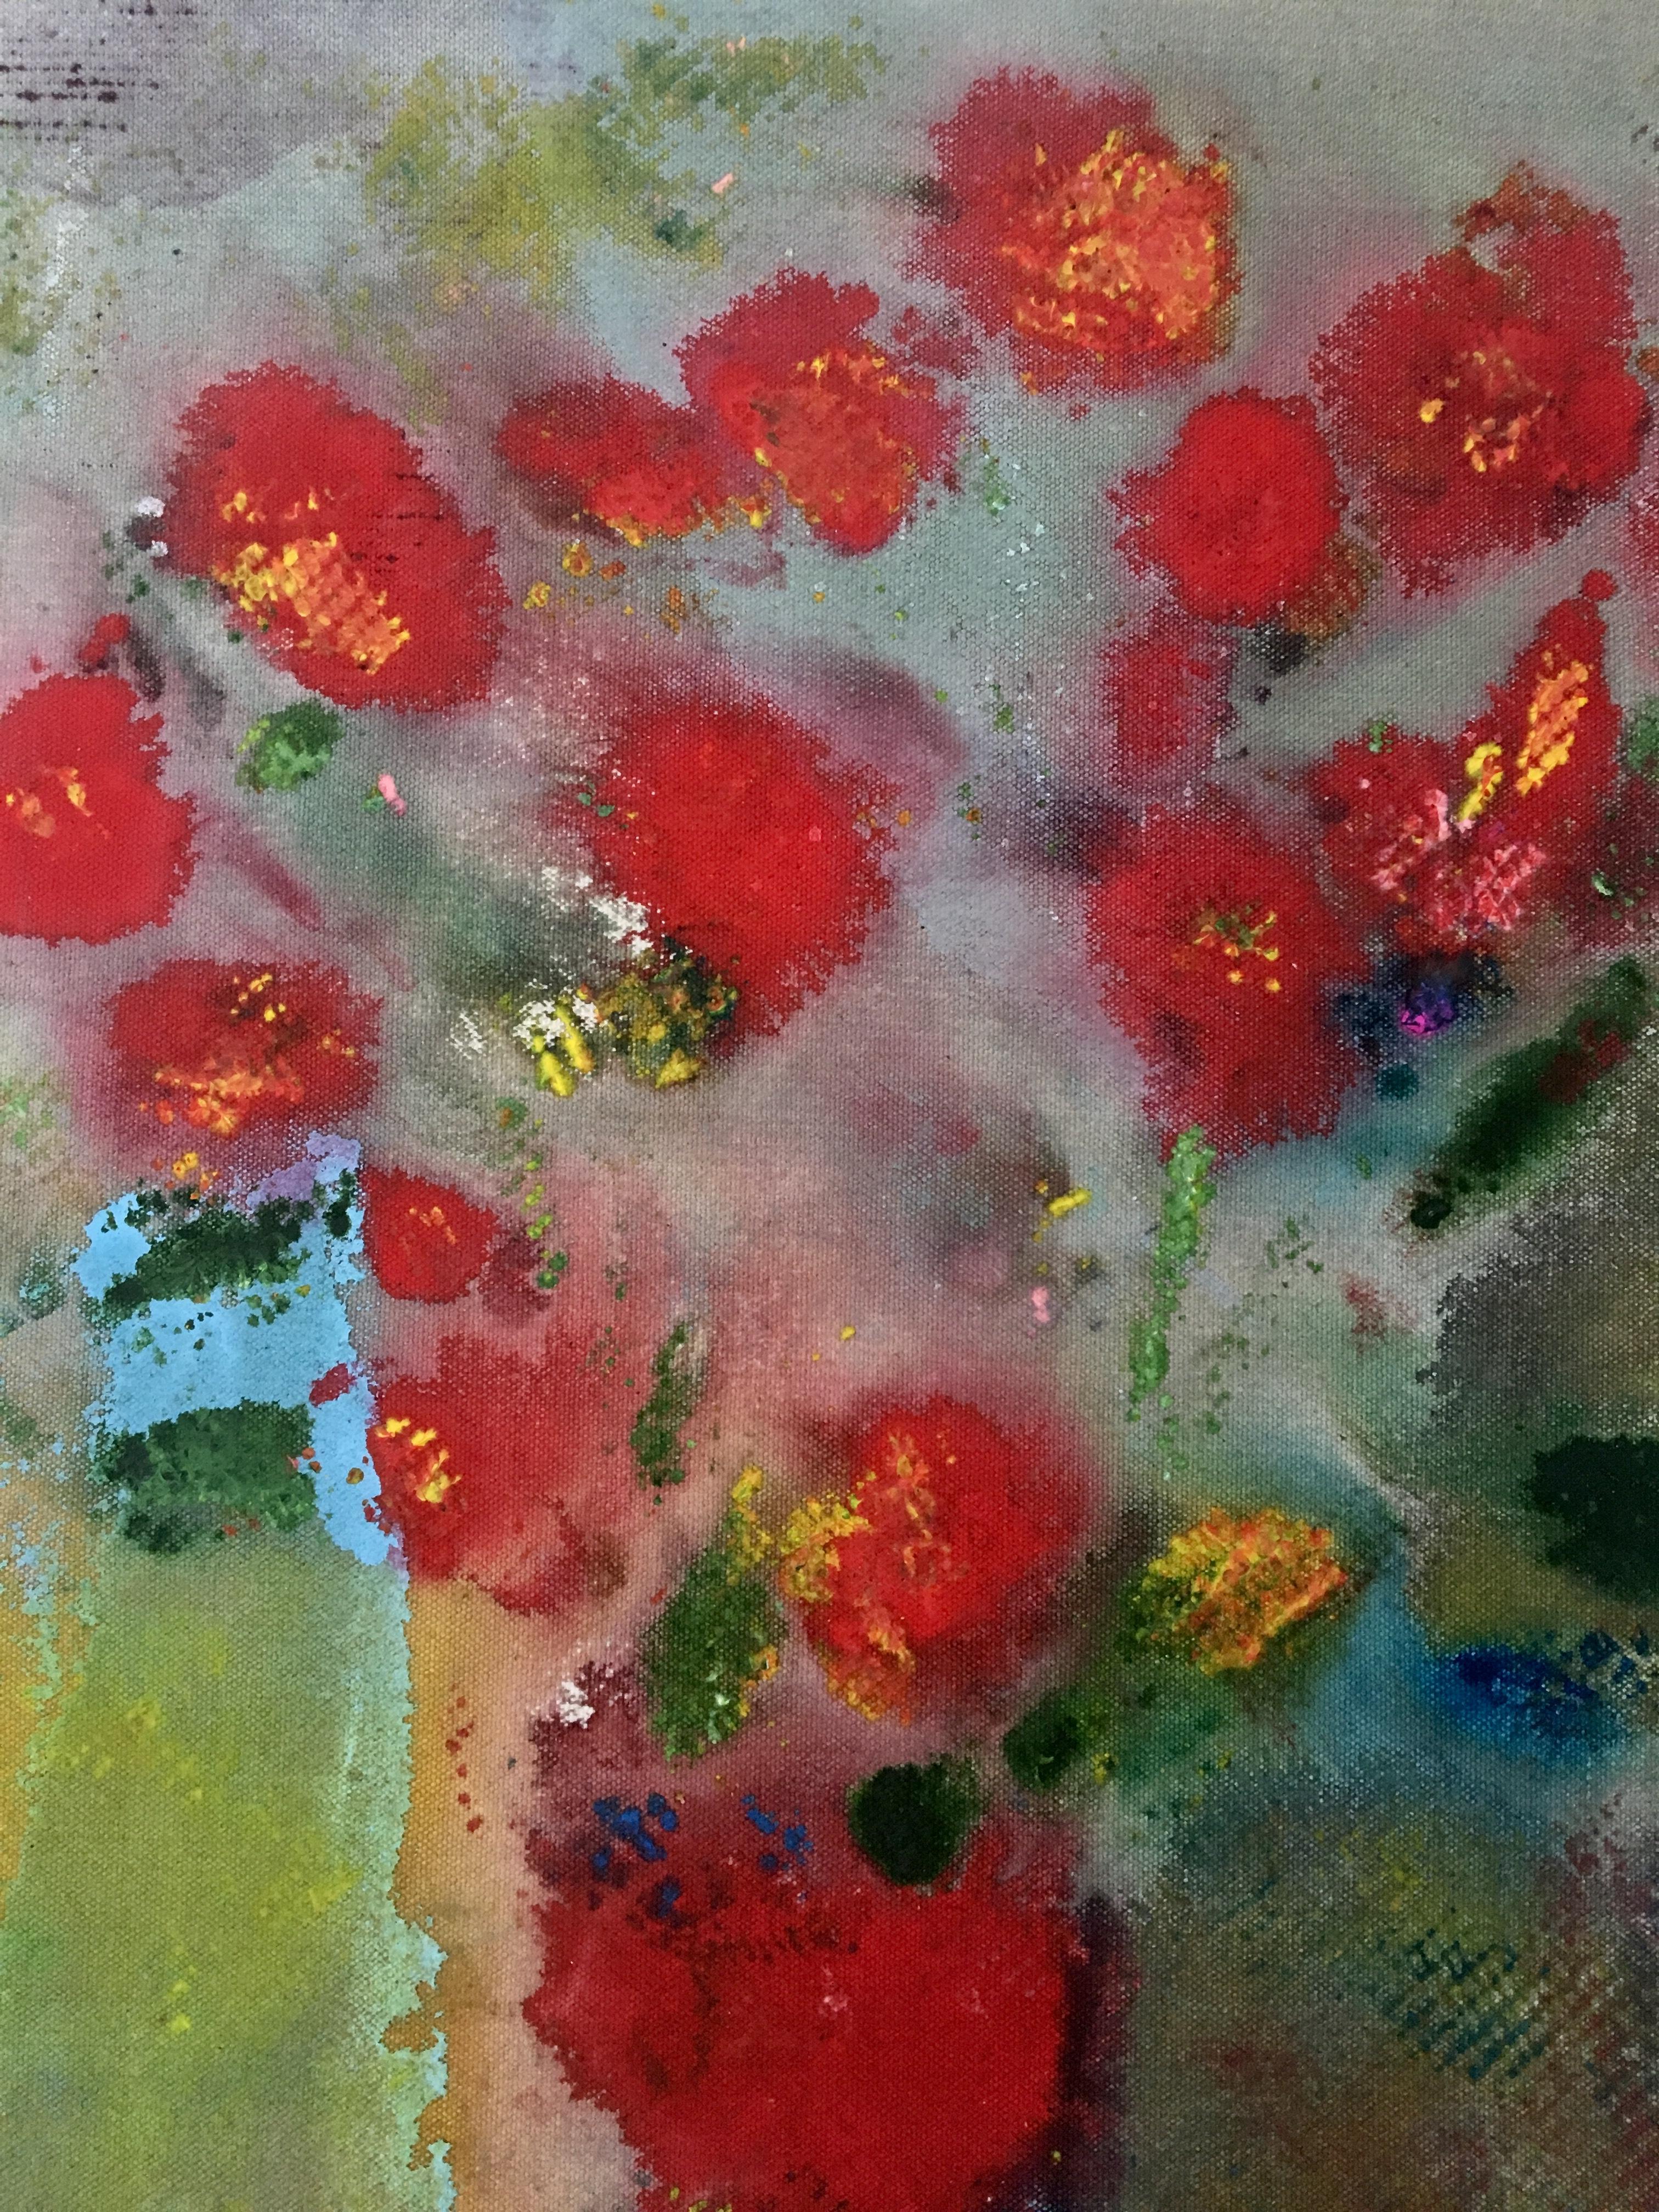 Painting of Bouquet of flowers on canvas : 'Red Pom Poms' - Brown Still-Life Painting by Joel Handorff